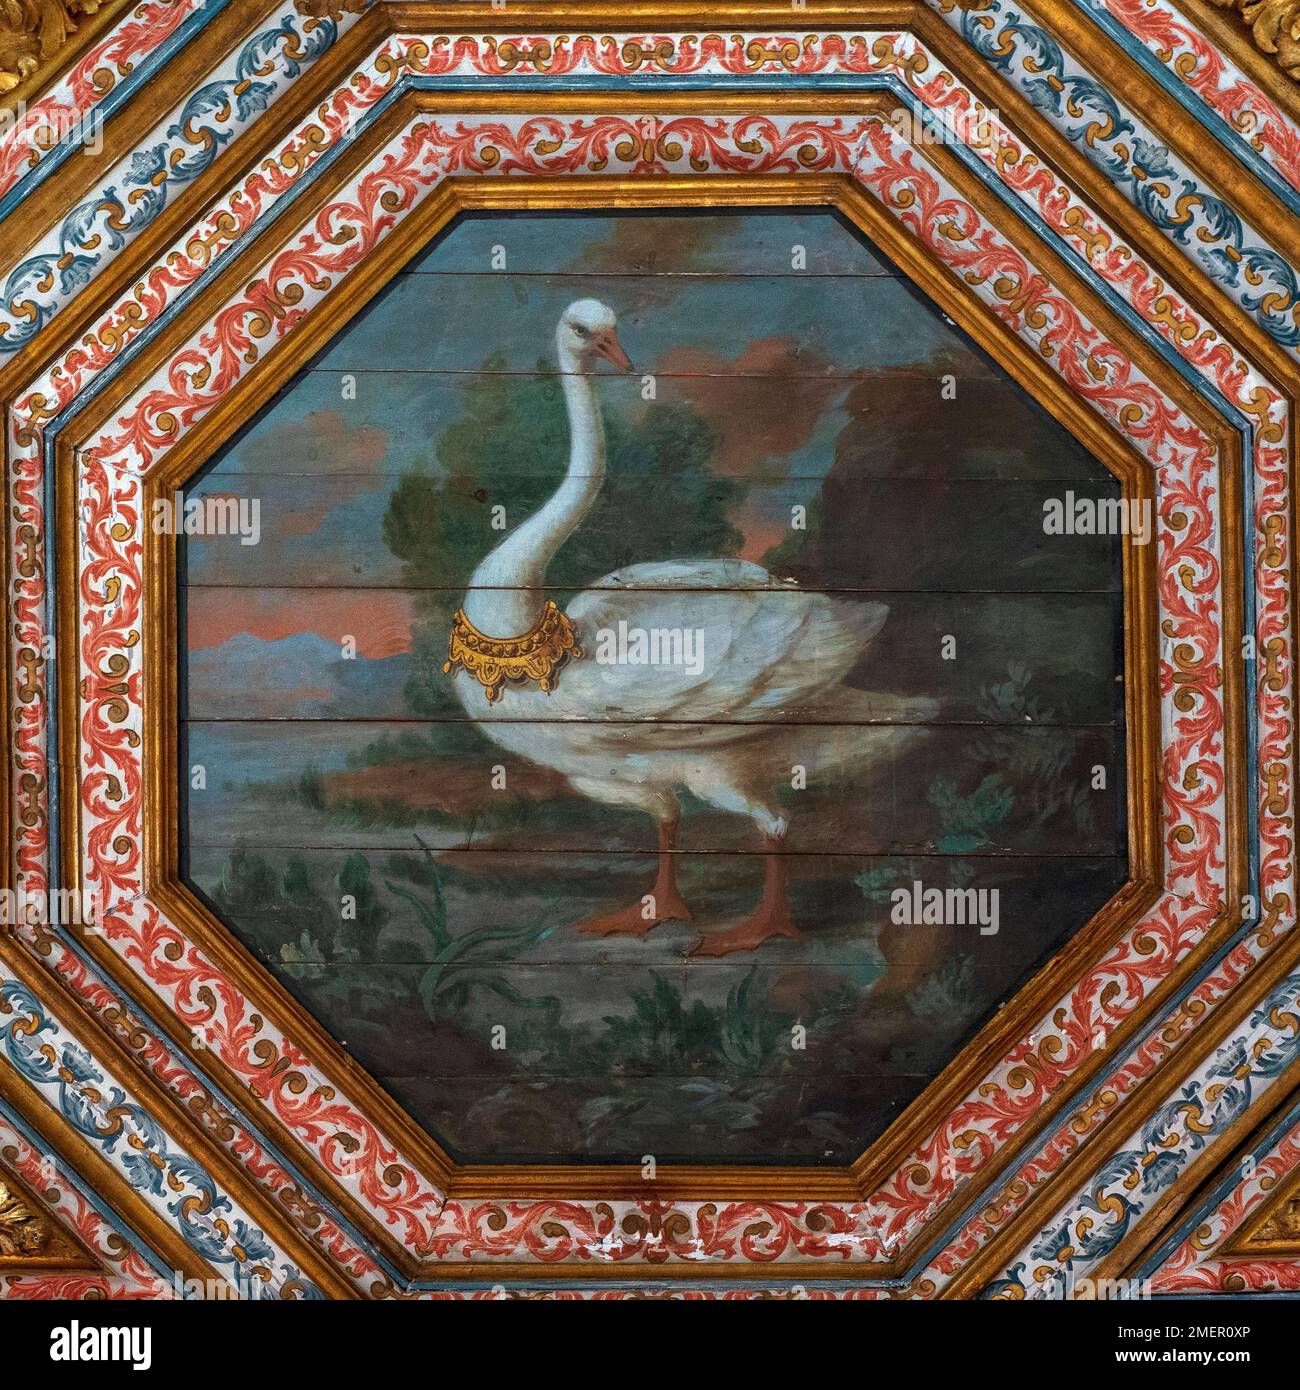 The Room of the Swans: square format view of one of the 30 crowned swans painted in the 1400s on the ceiling of the Sala dos Cisnes in the Palácio Nacional, the royal summer palace at Sintra, near Lisbon, Portugal.  The birds, an heraldic symbol, recall England’s Lancastrian royal dynasty and the marriage in 1387 of Philippa of Lancaster to the Portuguese monarch, King John I. Stock Photo